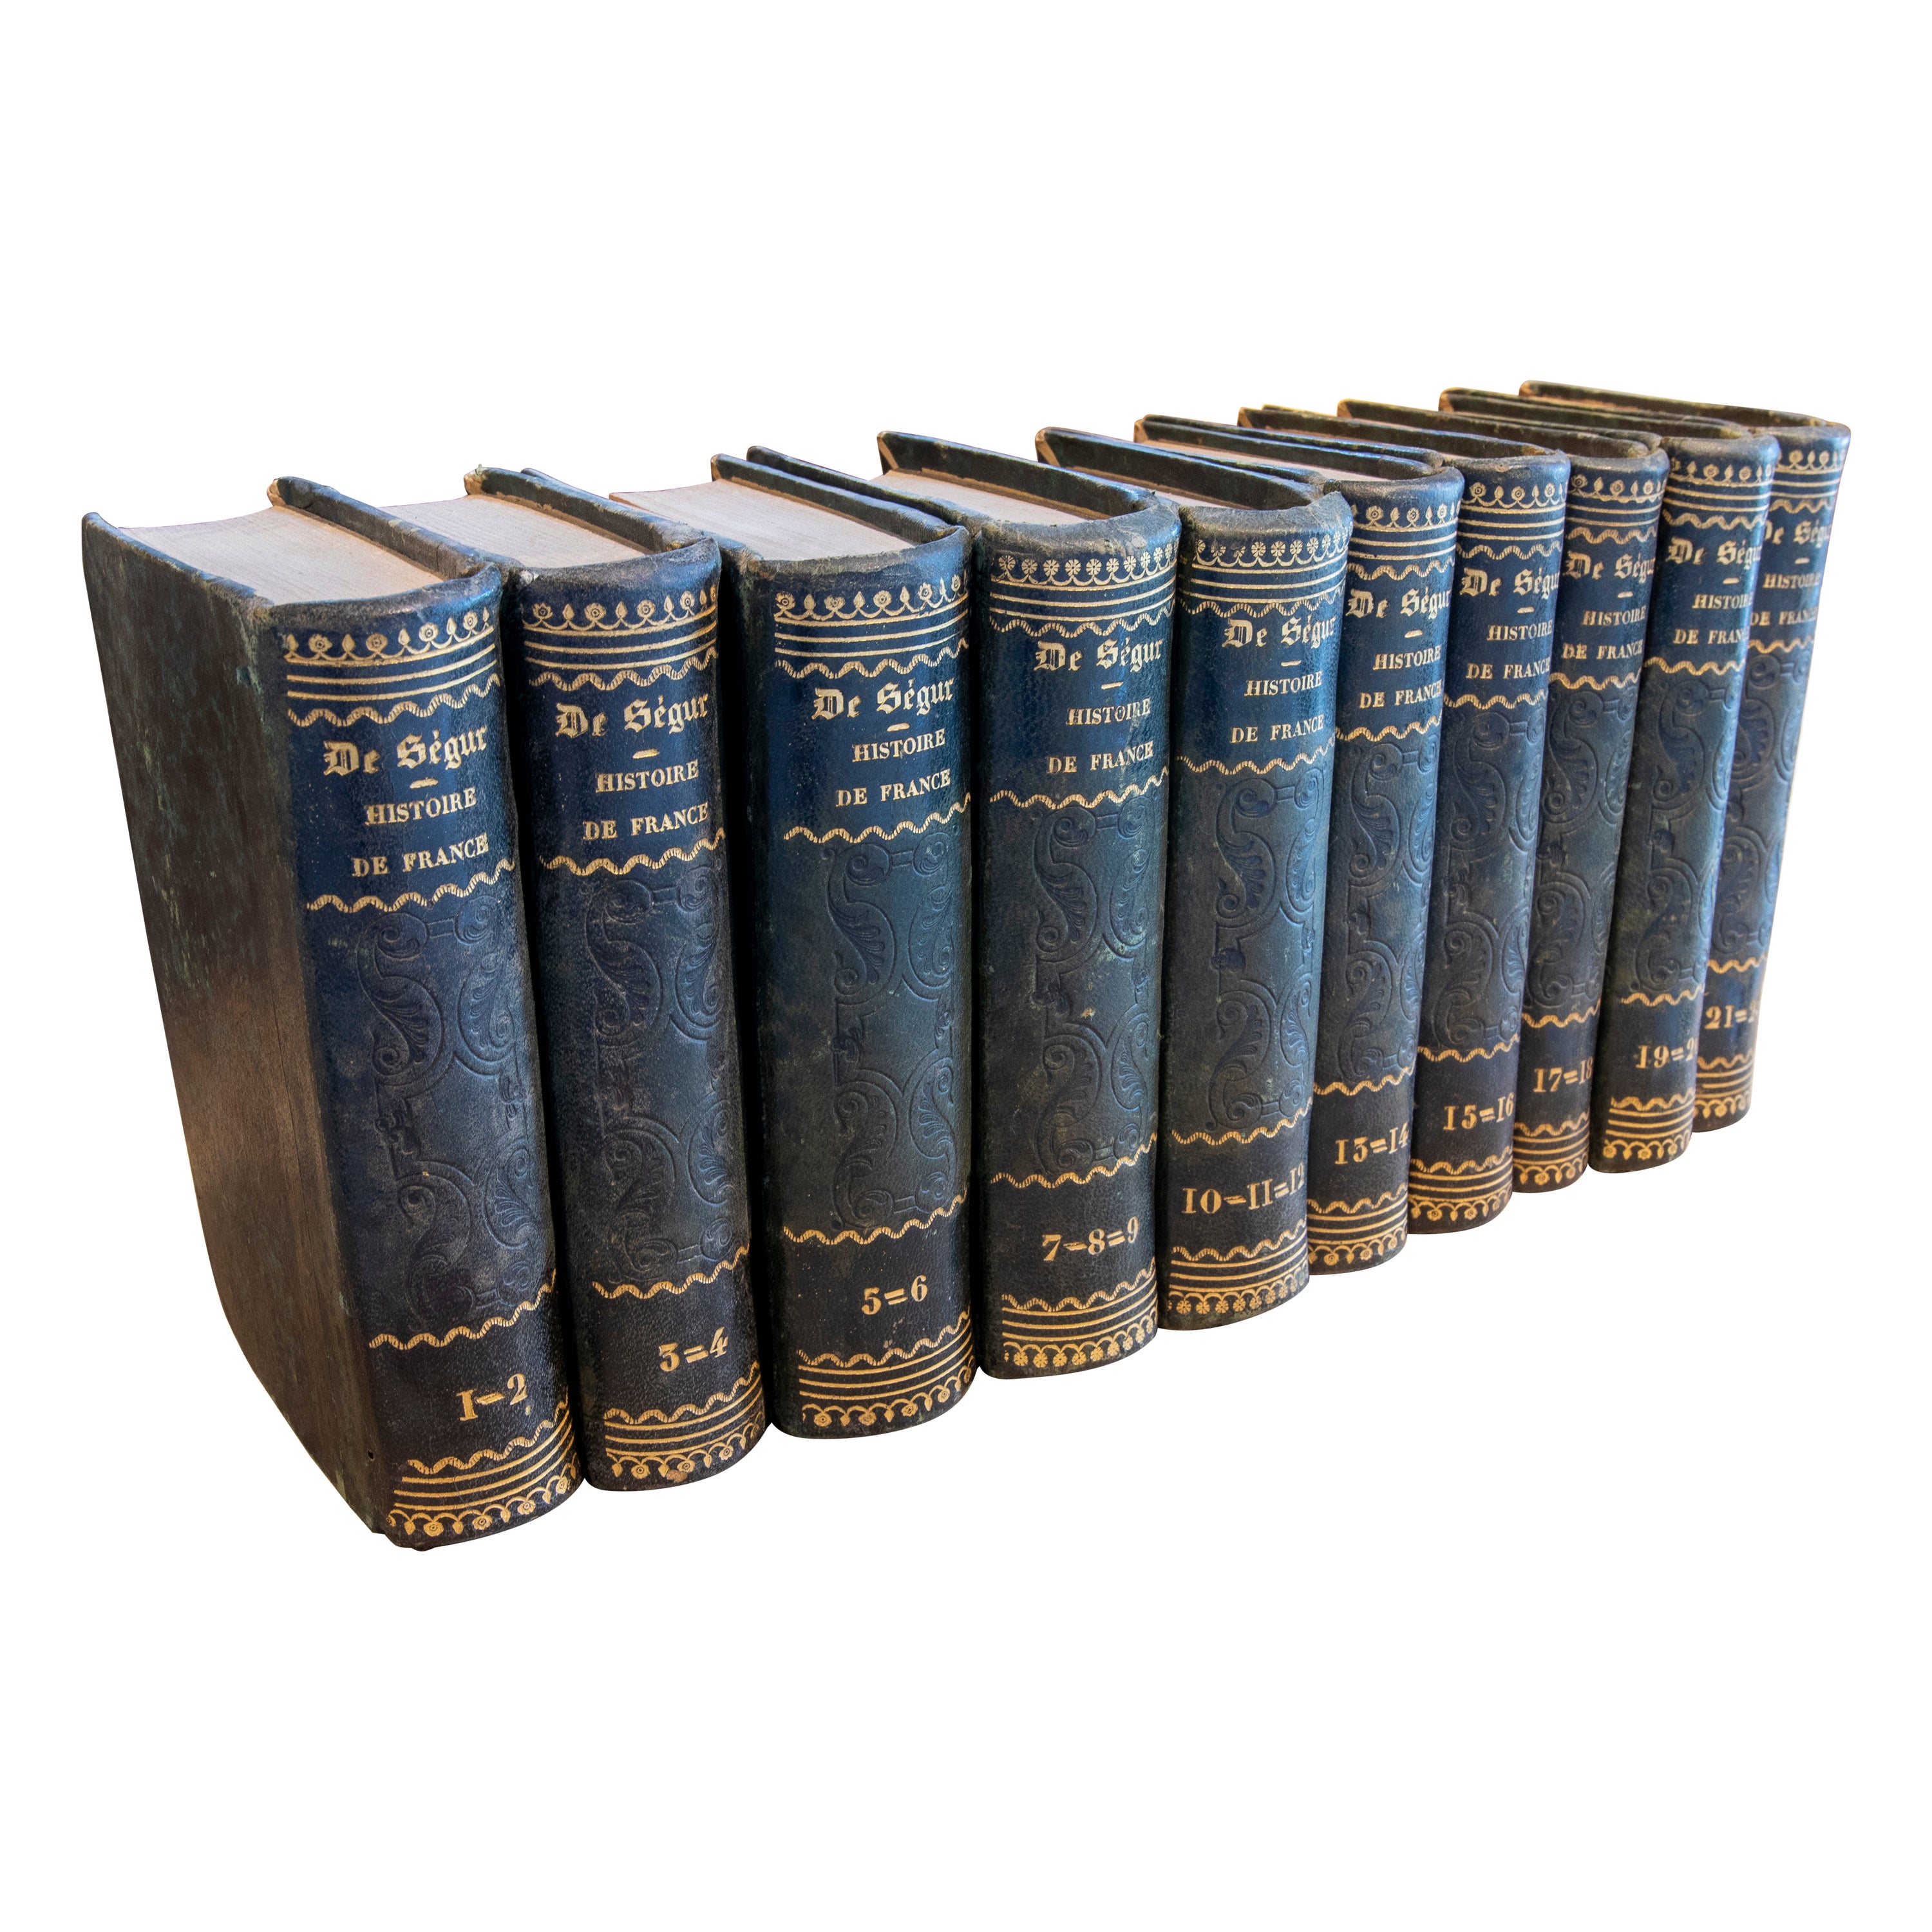 Collection of Books From1833 , From "L'Histoire Universelle, Ancienne et Moderne